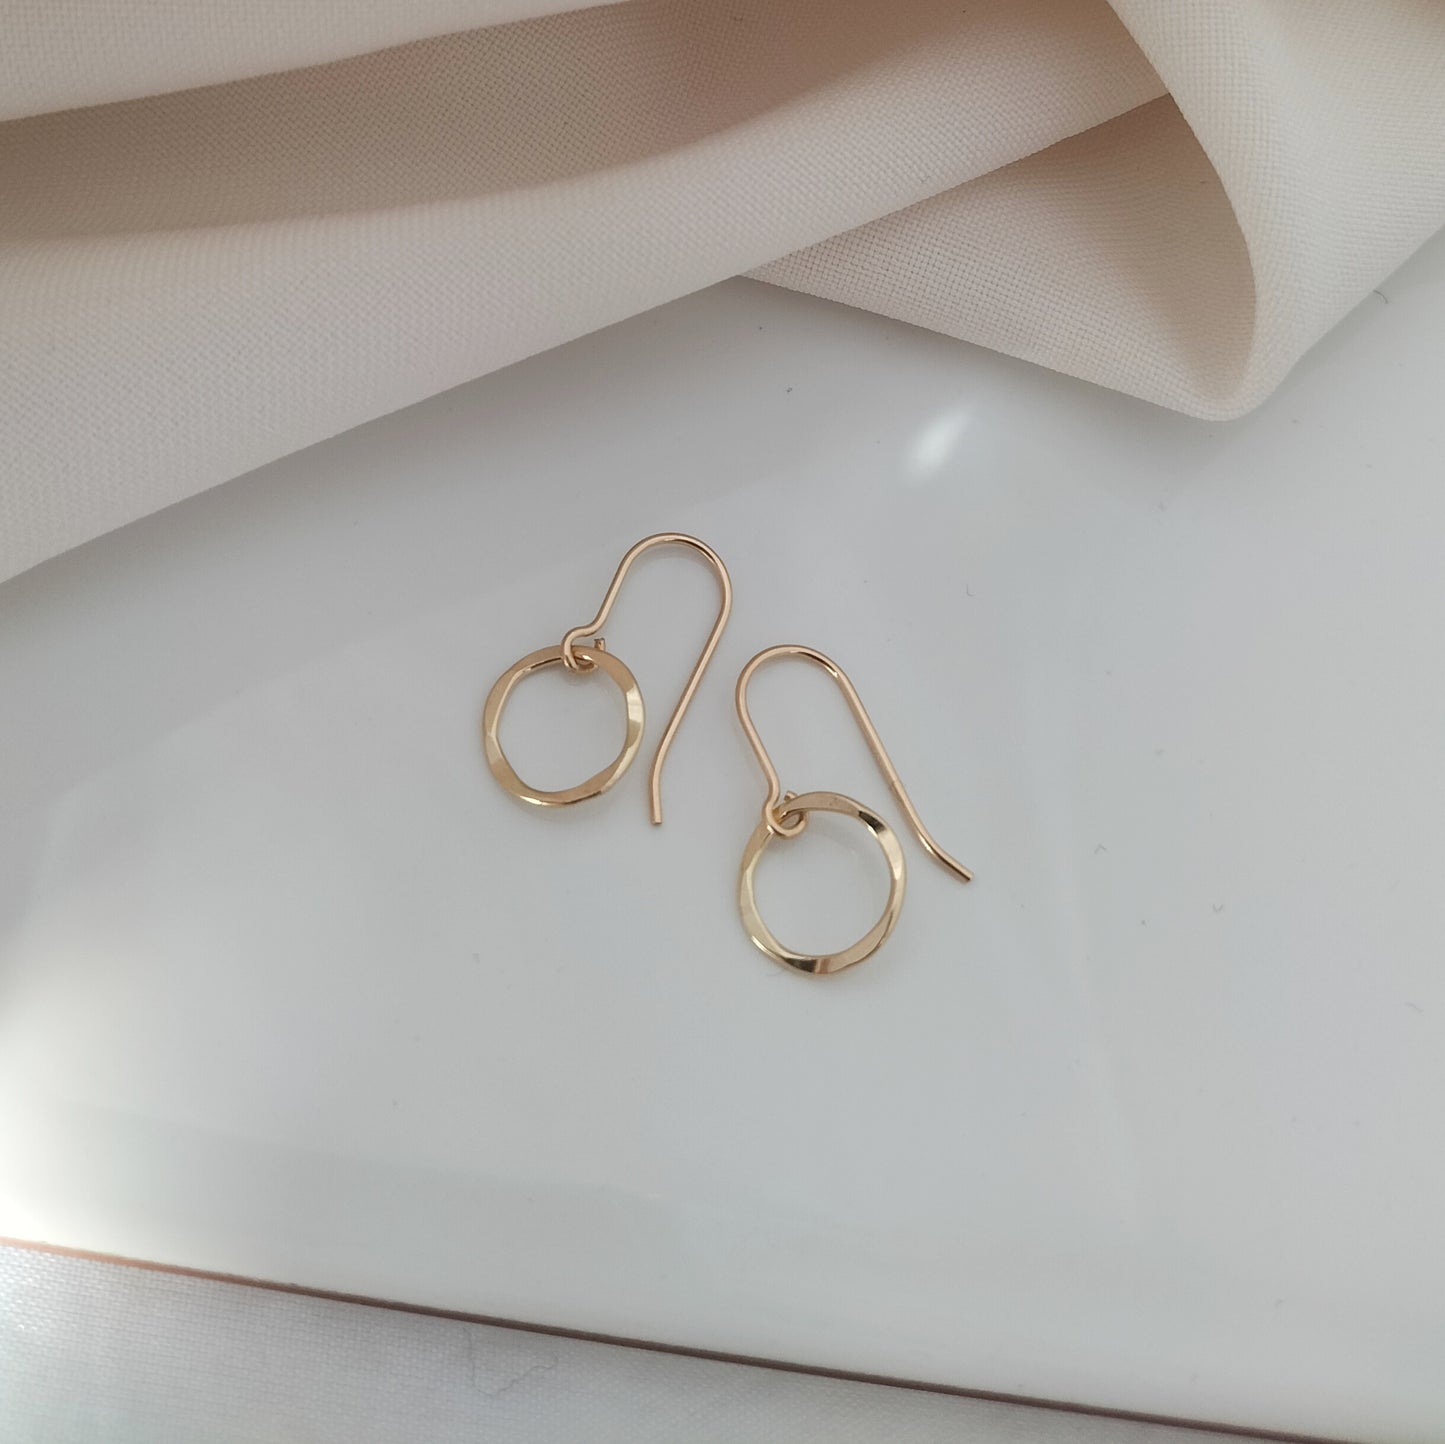 Textured Gold Circle earrings